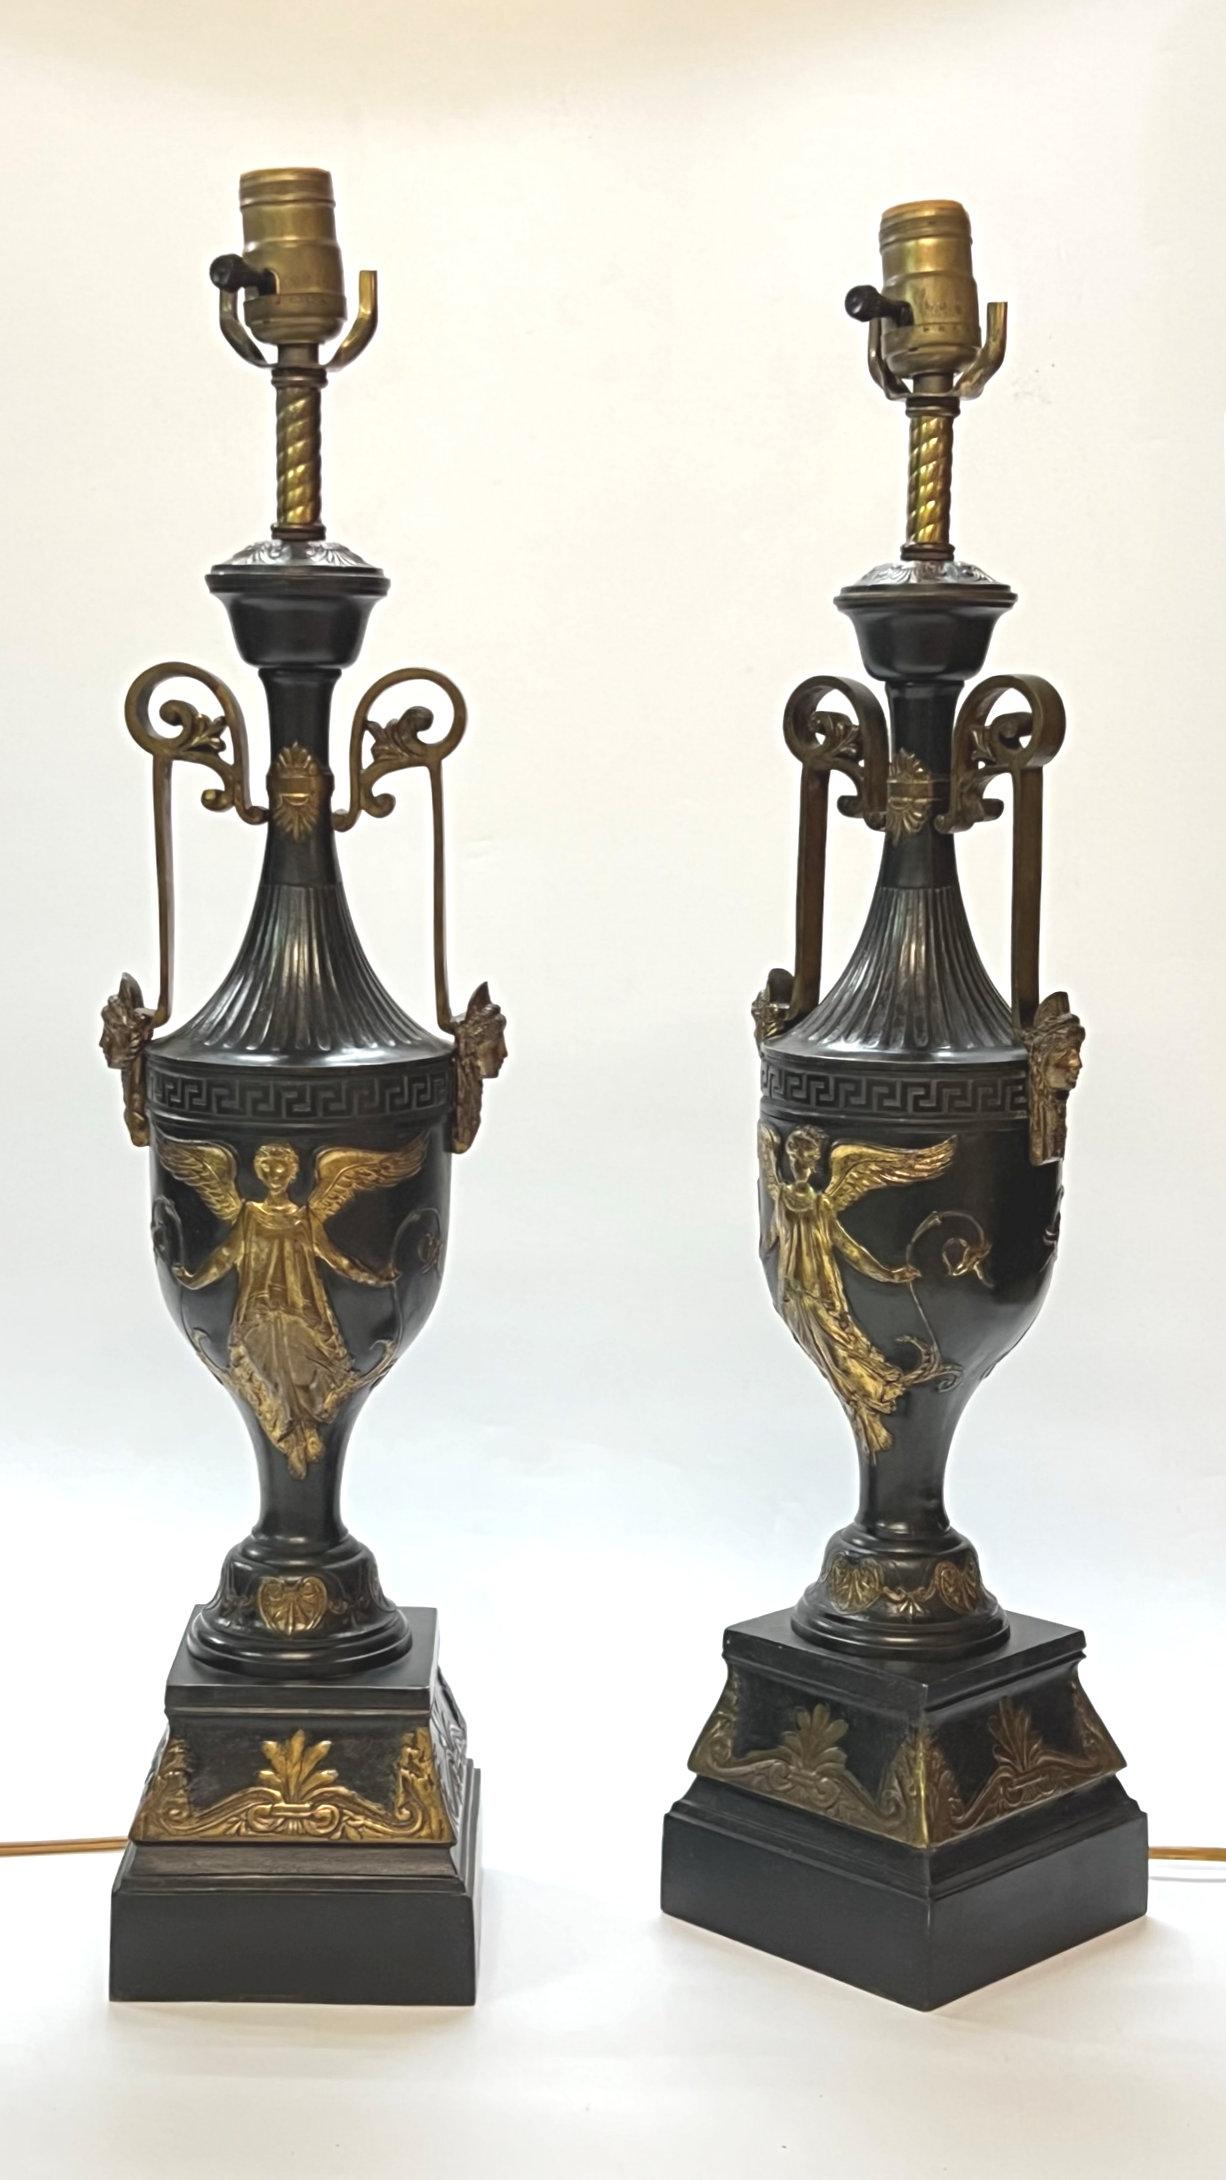 Pair of antique bronze table lamps in the form of neoclassical vases with the figures of winged goddesses, masks, and Greek key motifs.  With sockets and wiring, ready for use.